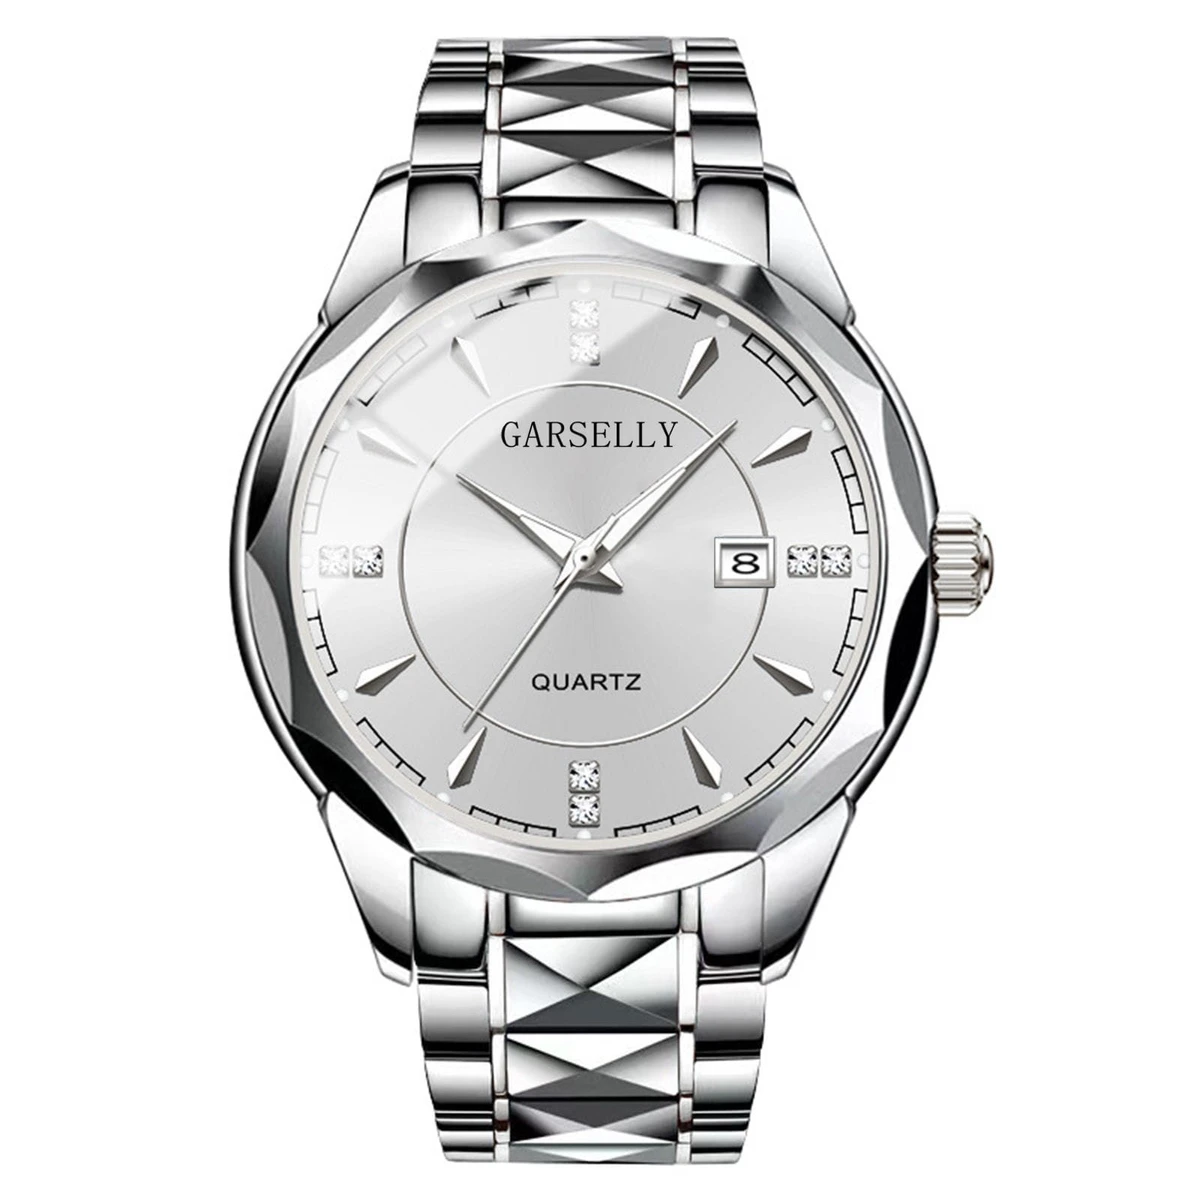 GARSELLY - Luxury Man Wristwatch Waterproof  Watch for Men Stainless Steel Men's Watches High Quality+Box-Silver&White